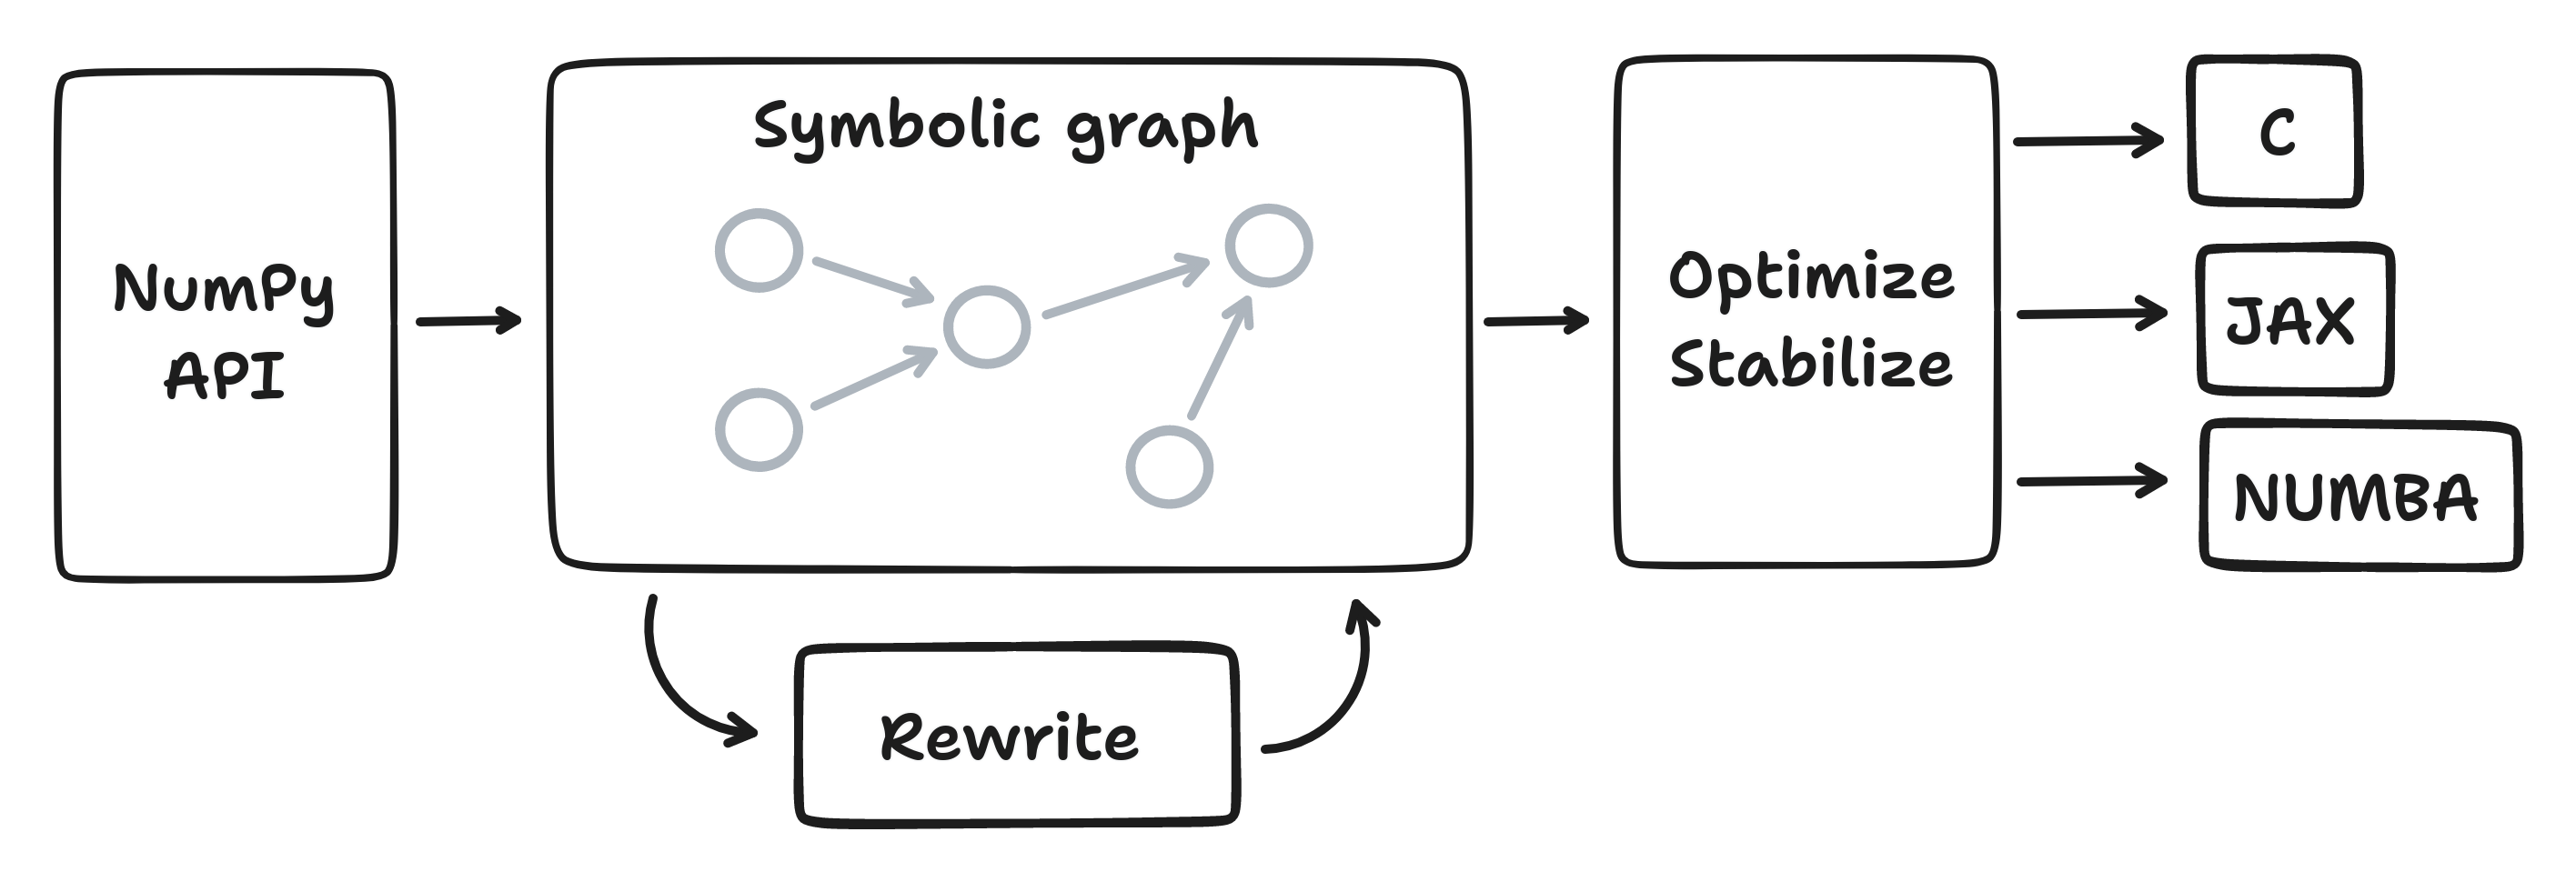 Aesara Overview Diagram: A graph linking the different components of Aesara. From left to right: Numpy API->Symbolic Graph<->Rewrites->Optimize/Stabilize->[C, Jax, Numba]